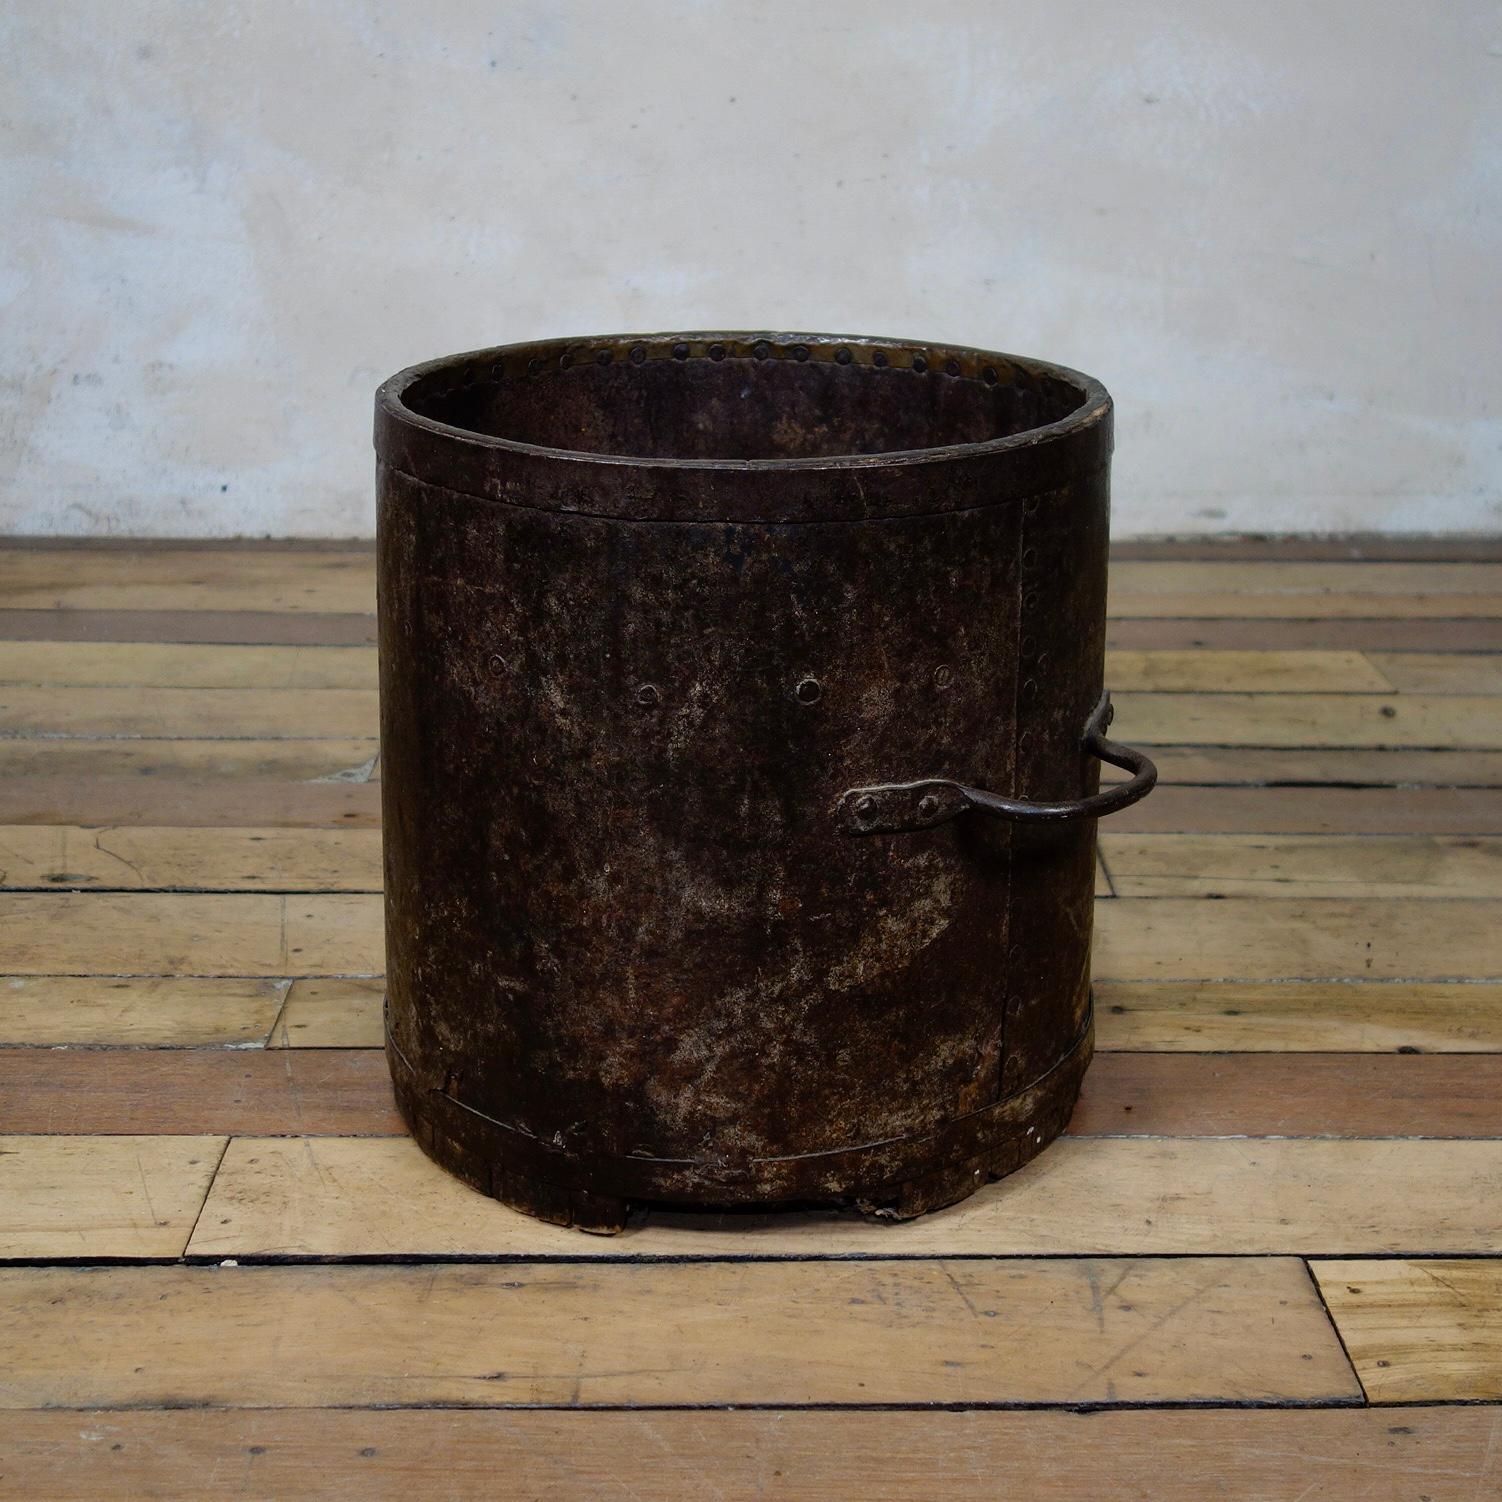 A Primitive 19th century bushel barrel, measuring vessel, originally used for measuring consistent quantities of agricultural products such as wheat. Displaying iron handles and bindings, a striking accent piece for a casual